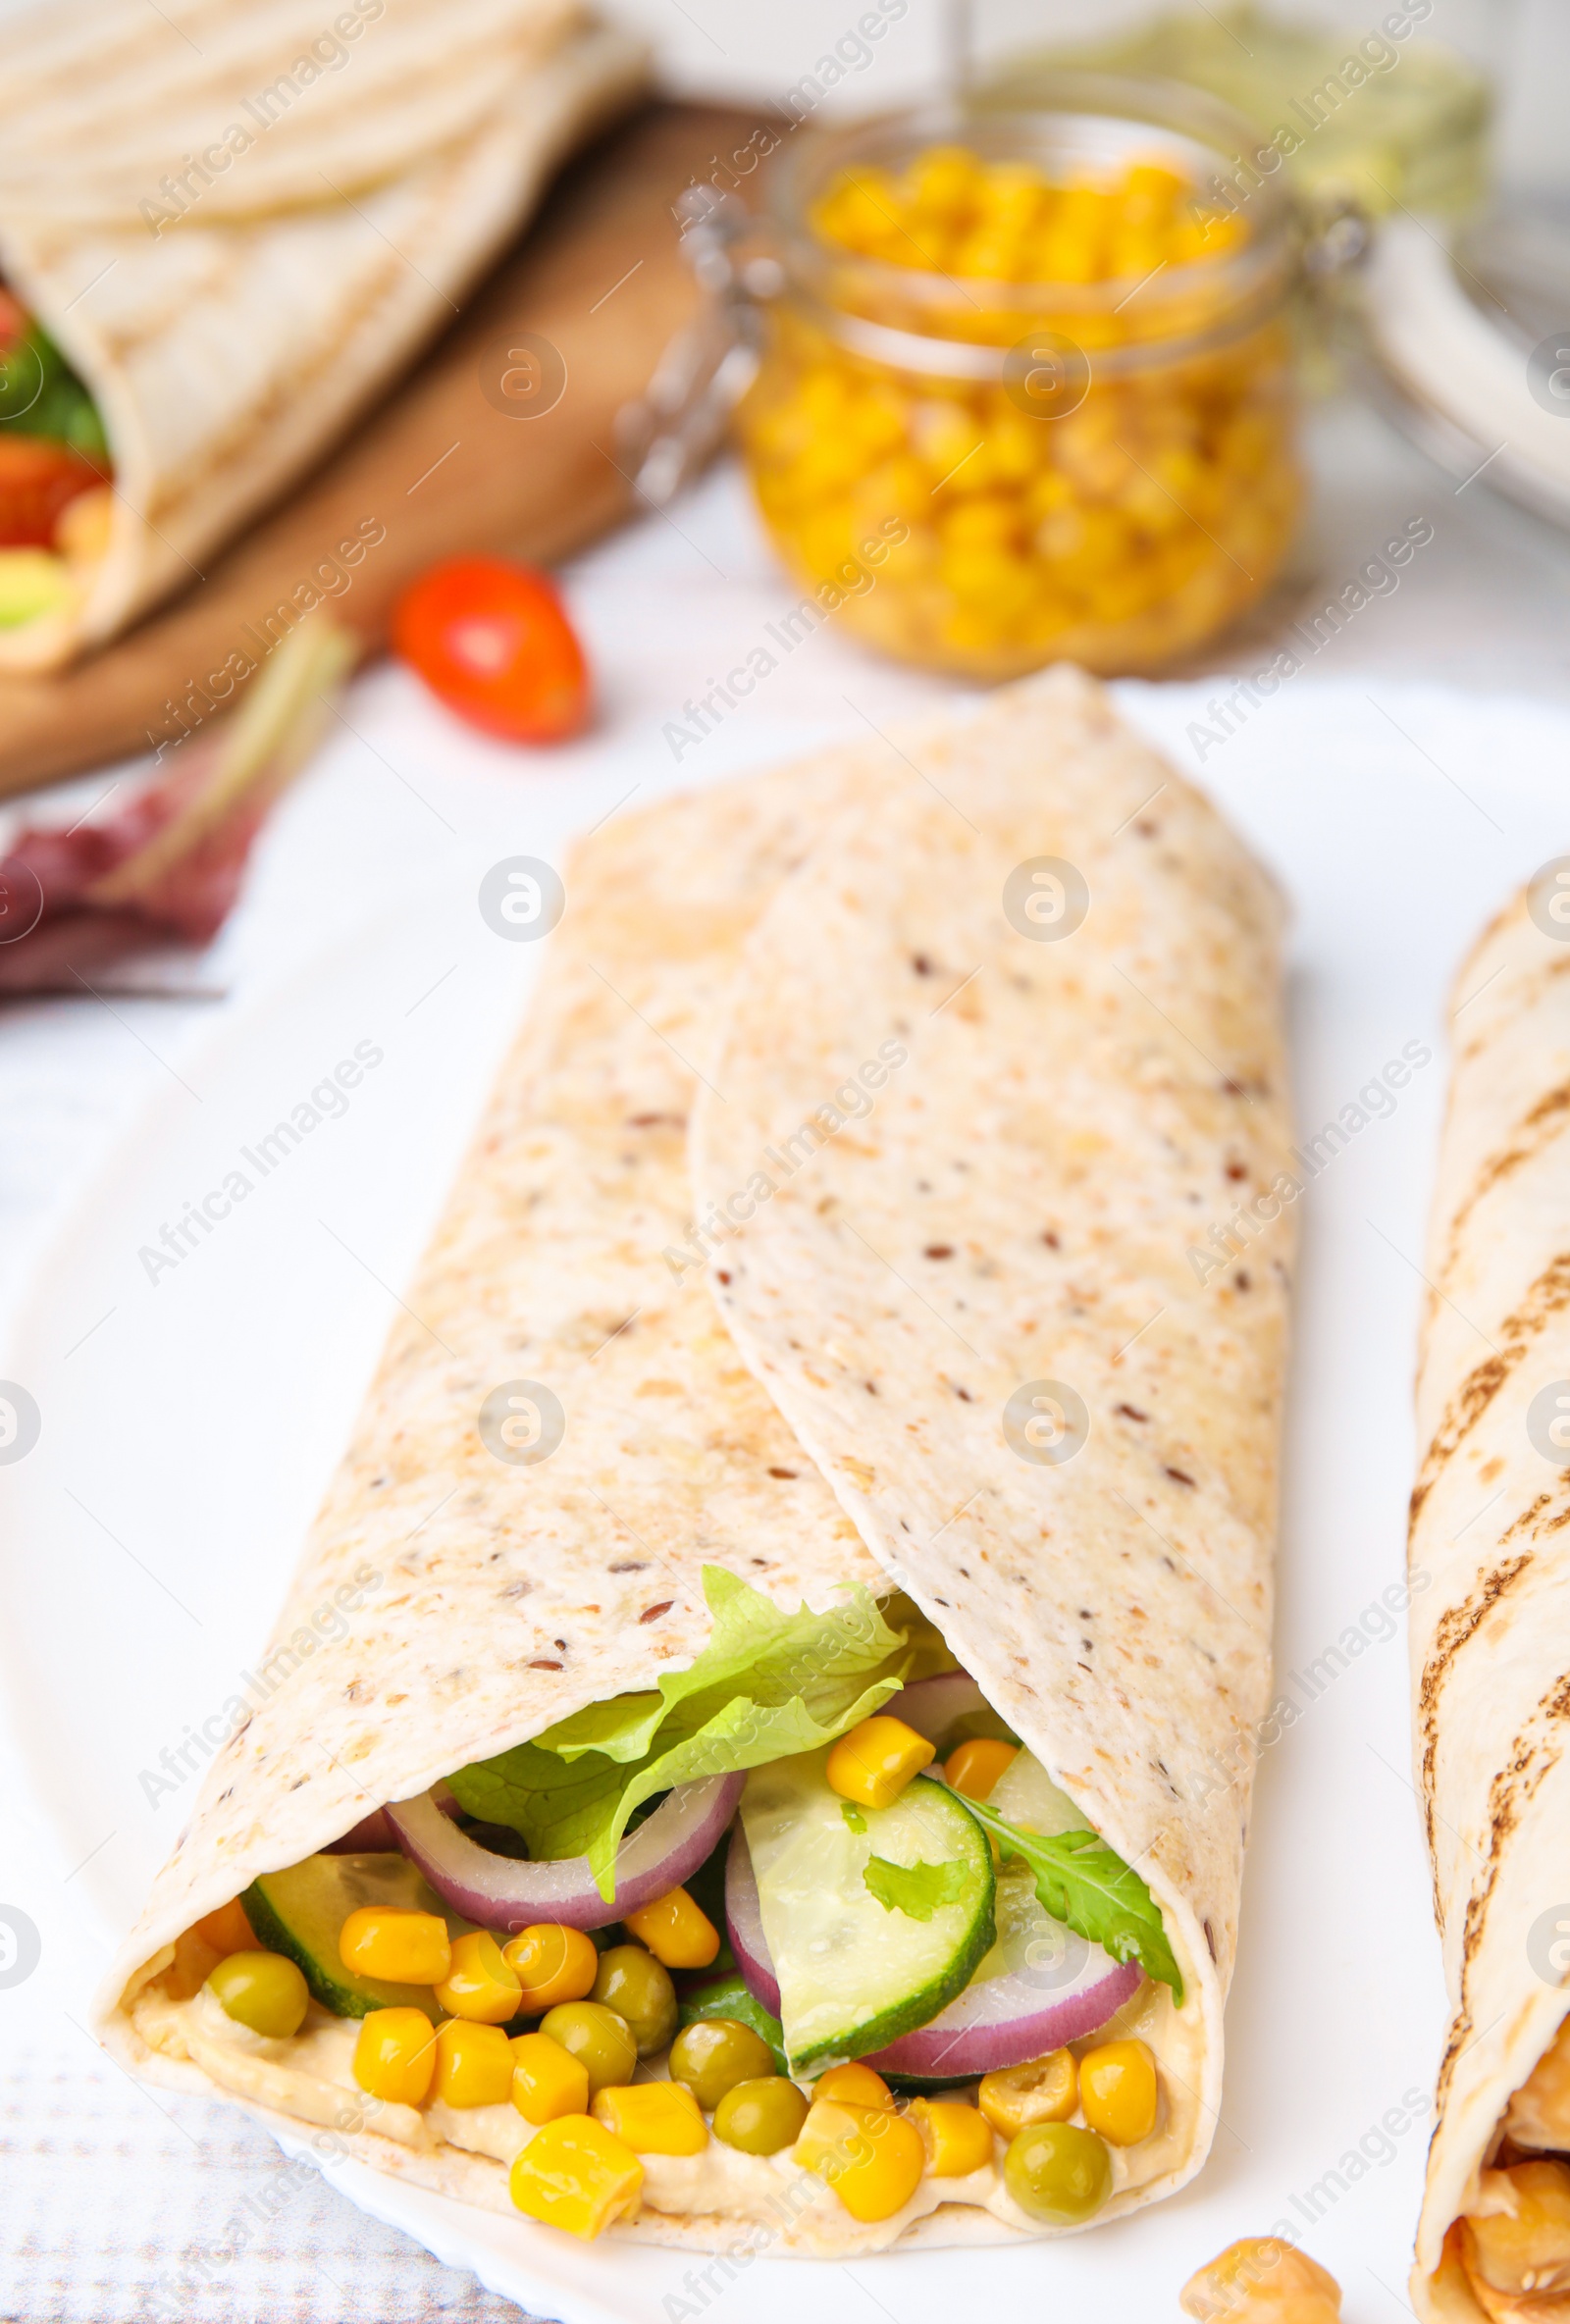 Photo of Delicious hummus wrap with vegetables on table